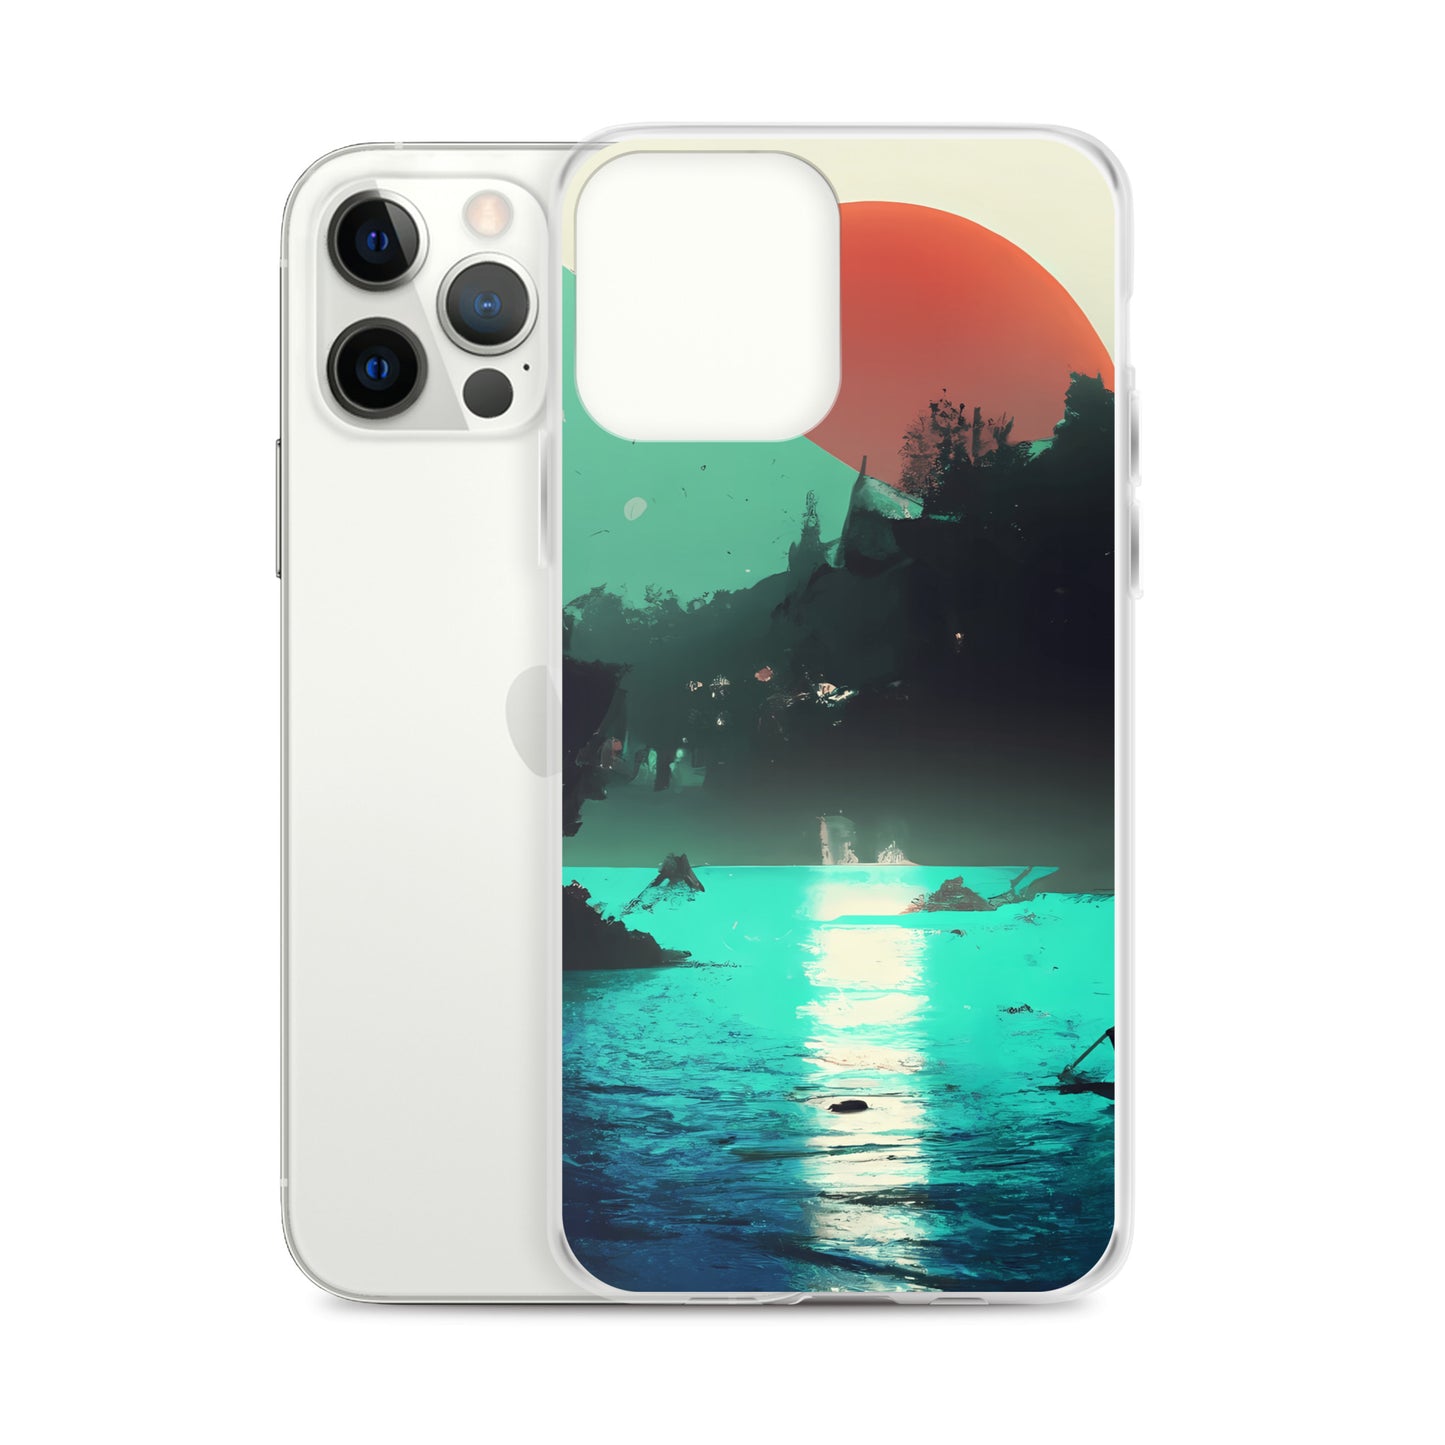 Magical Landscapes: iPhone Case with Enchanting Scenery